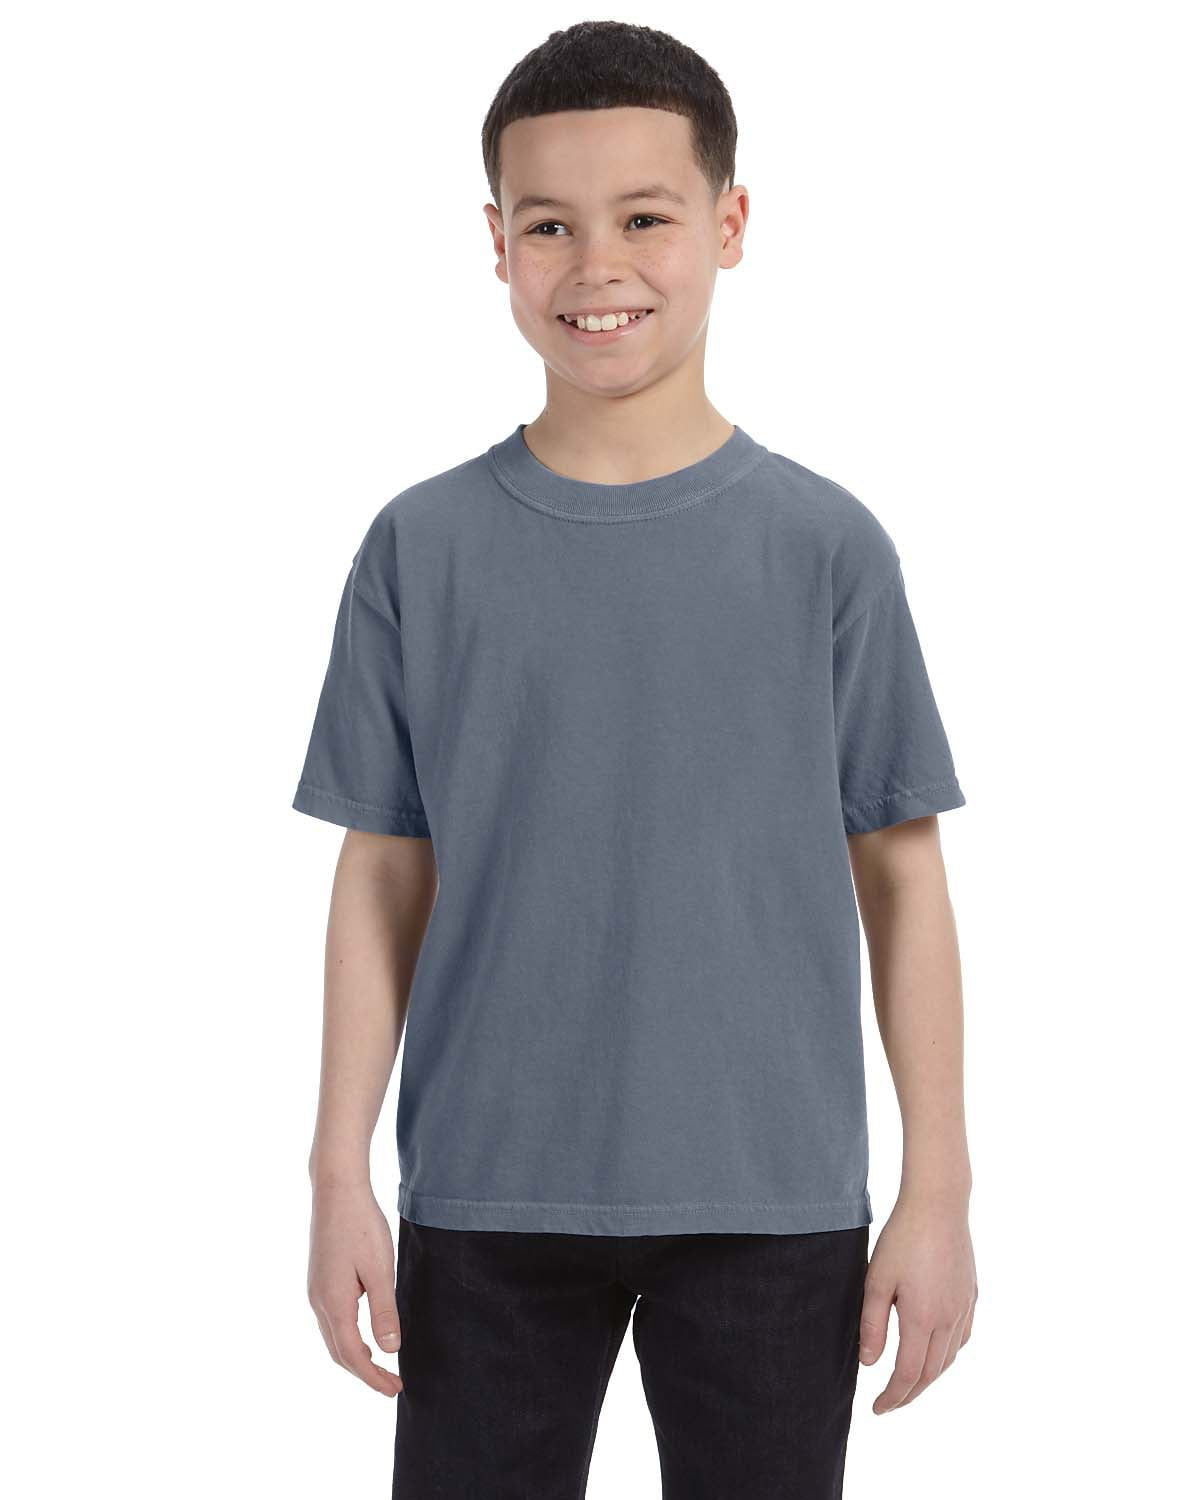 C9018 Comfort Colors Youth Midweight RS T-Shirt 